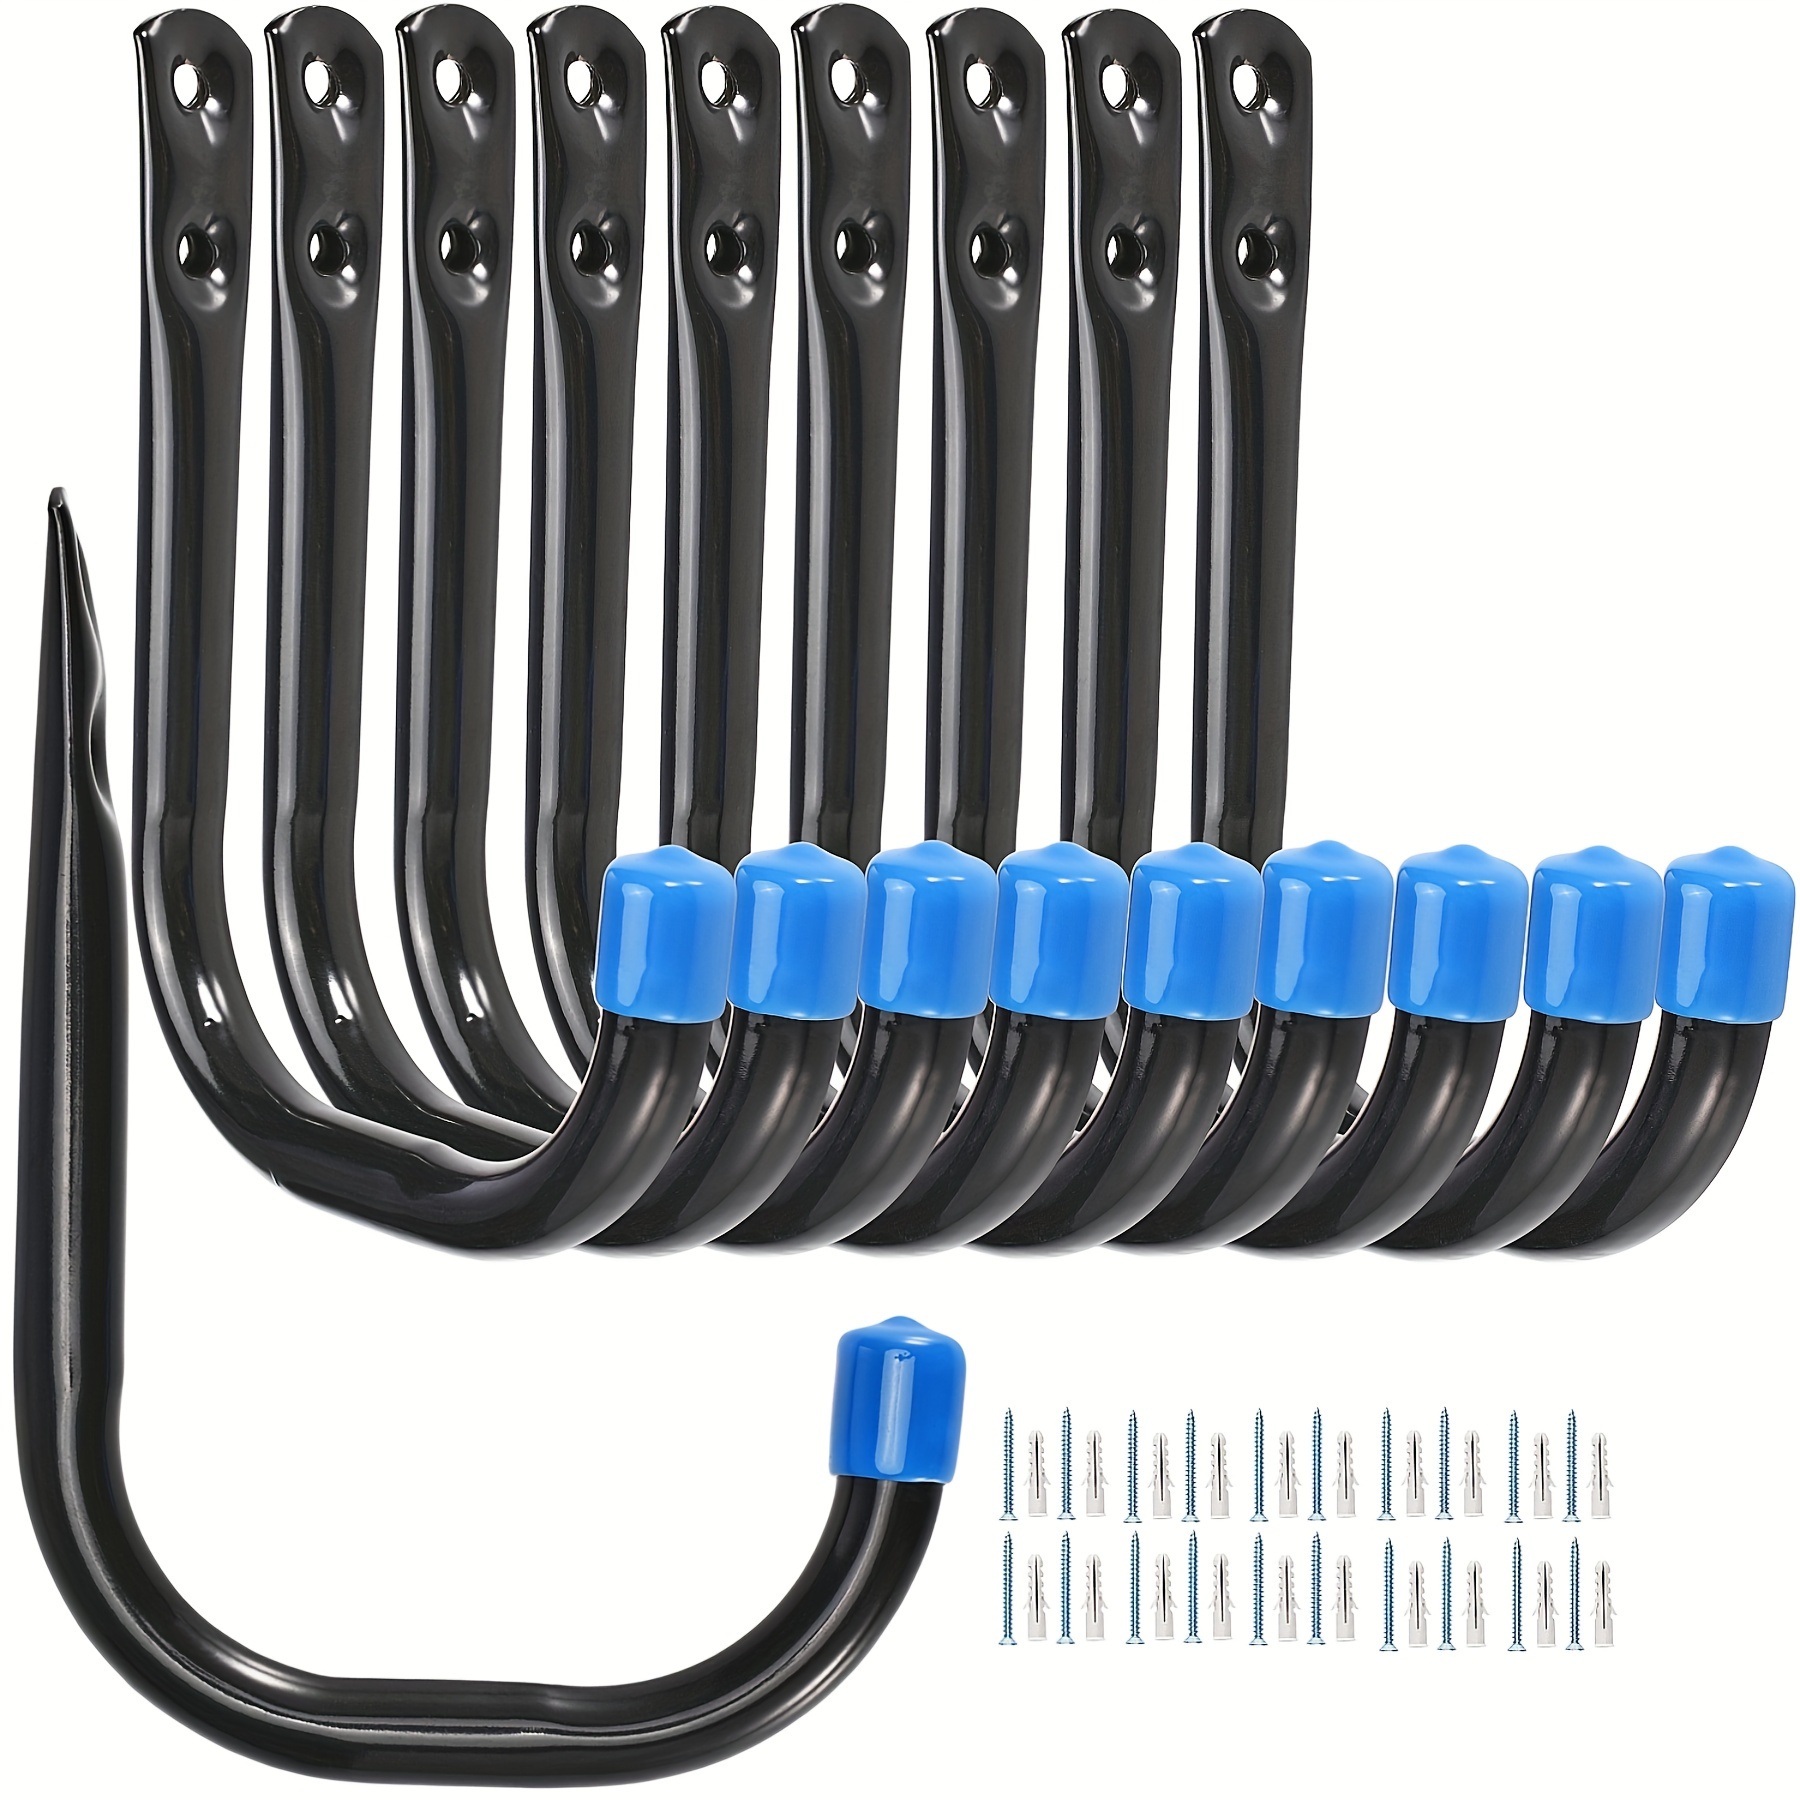 

10pcs Heavy Duty Garage Storage Hooks, Industrial J Utility Hangers With Anti-slip Rubber Coating For Tools, Bikes, Ladders, Chairs, Metal Wall Mount Organizers